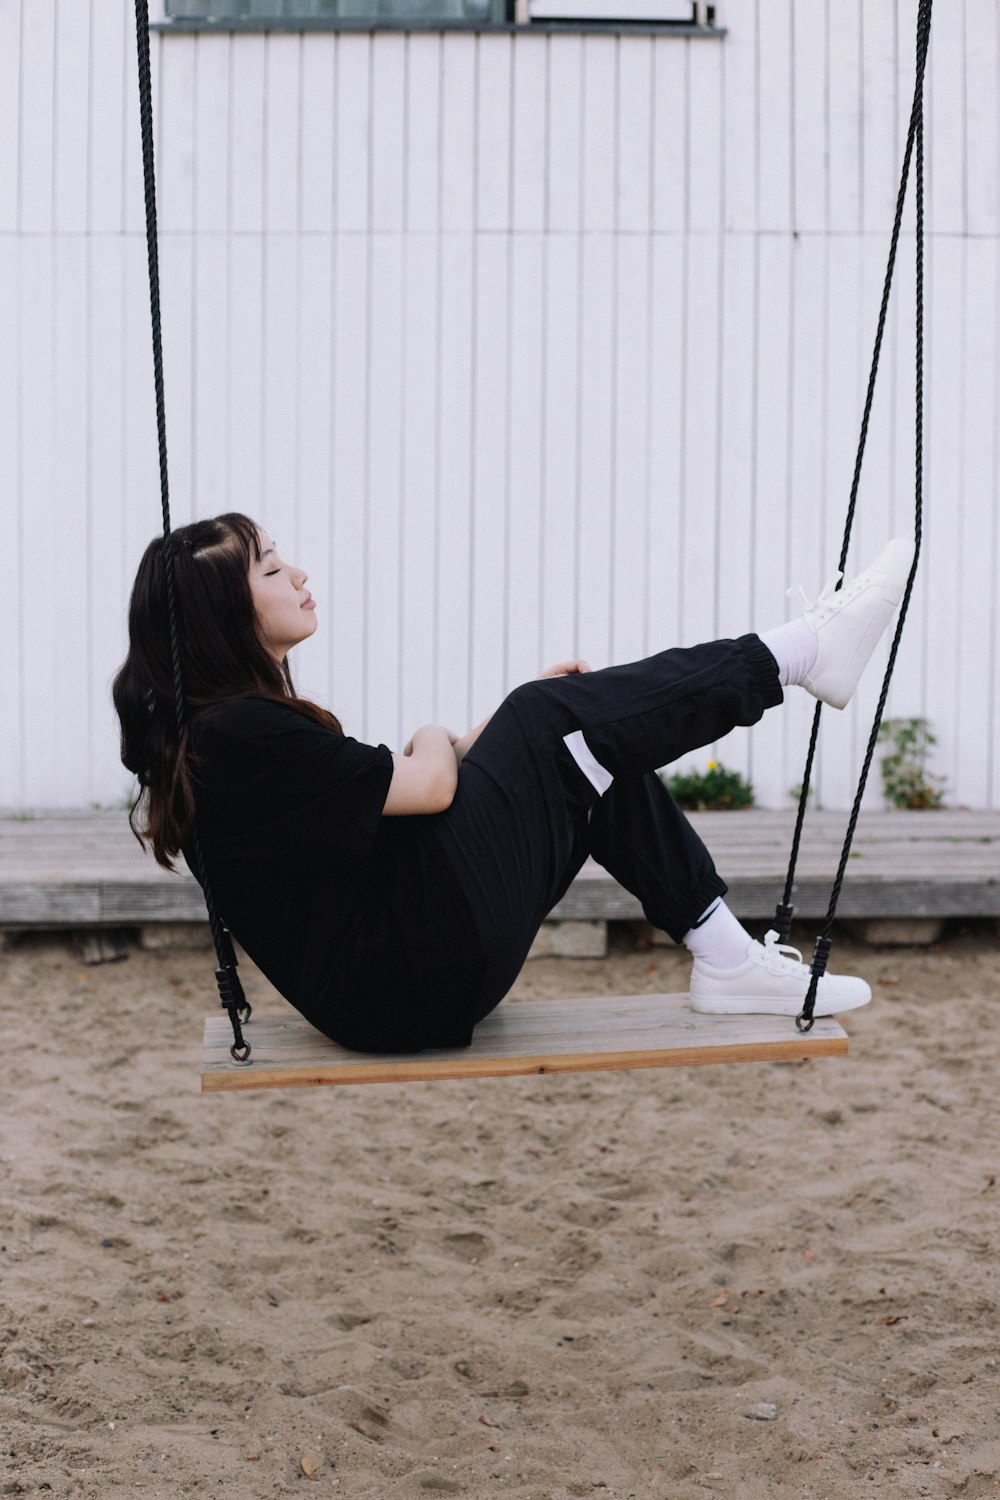 a person sitting on a swing